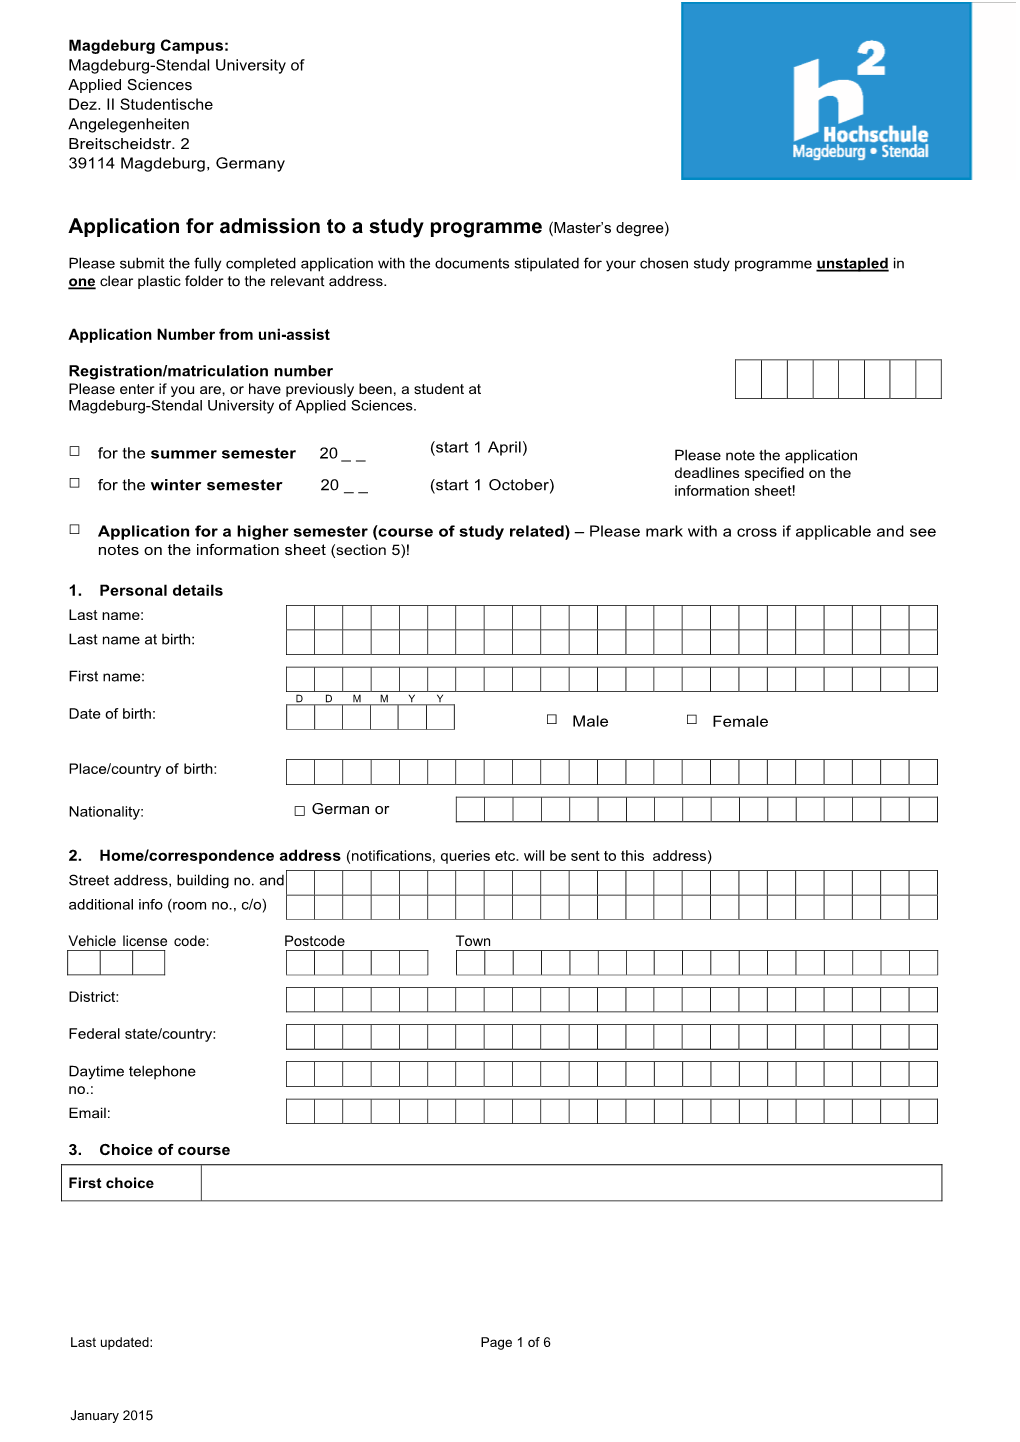 Application for Admission to a Study Programme (Master's Degree) Male